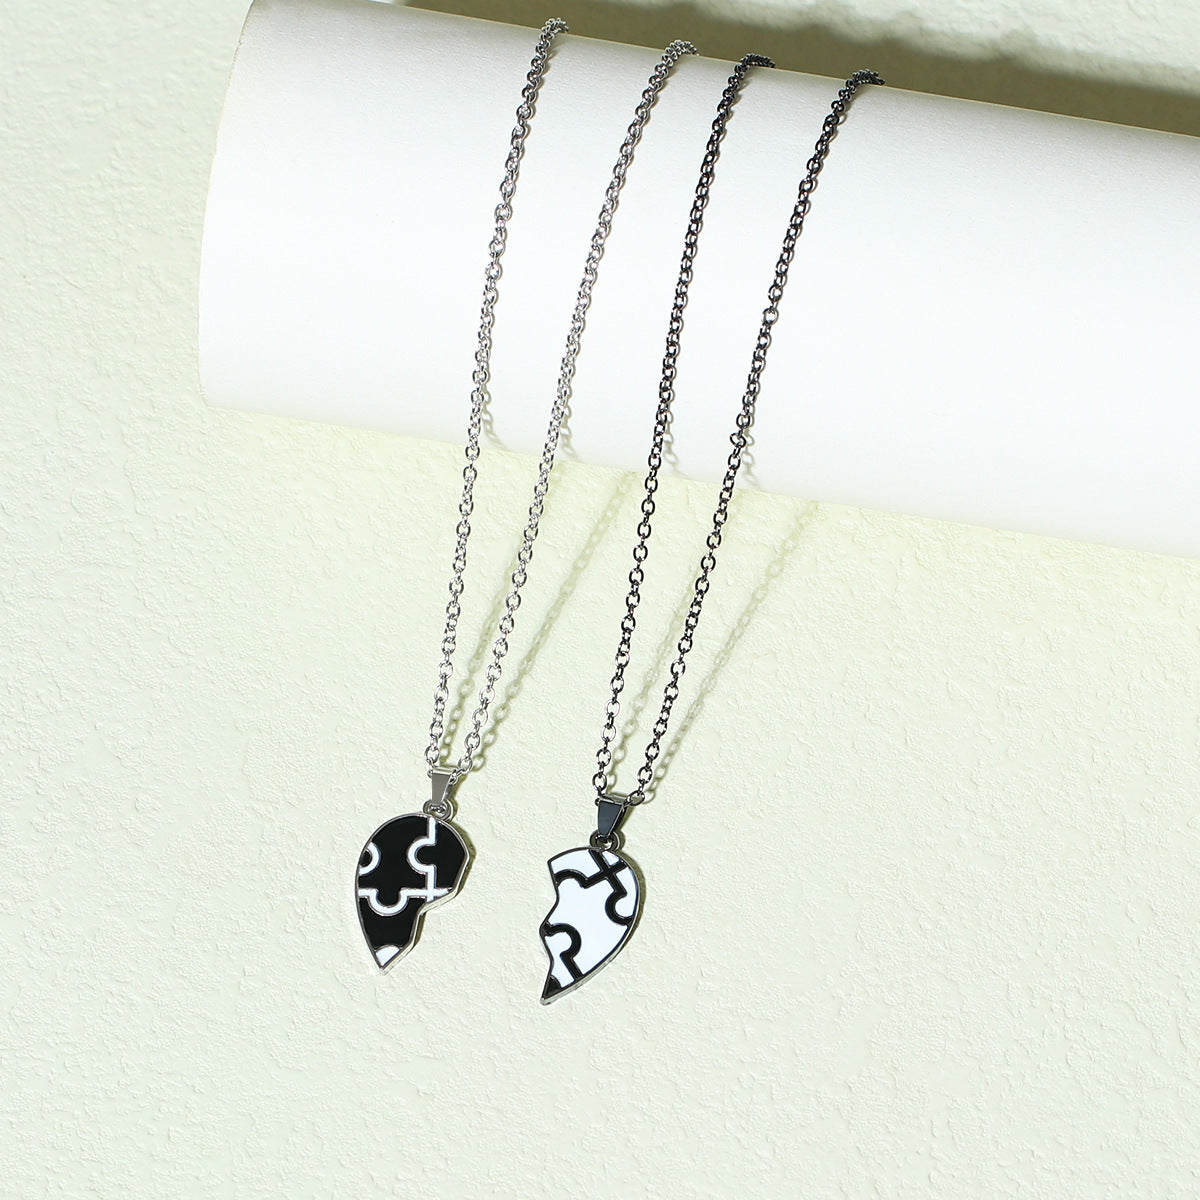 Half Hearts Necklaces Set for Couples